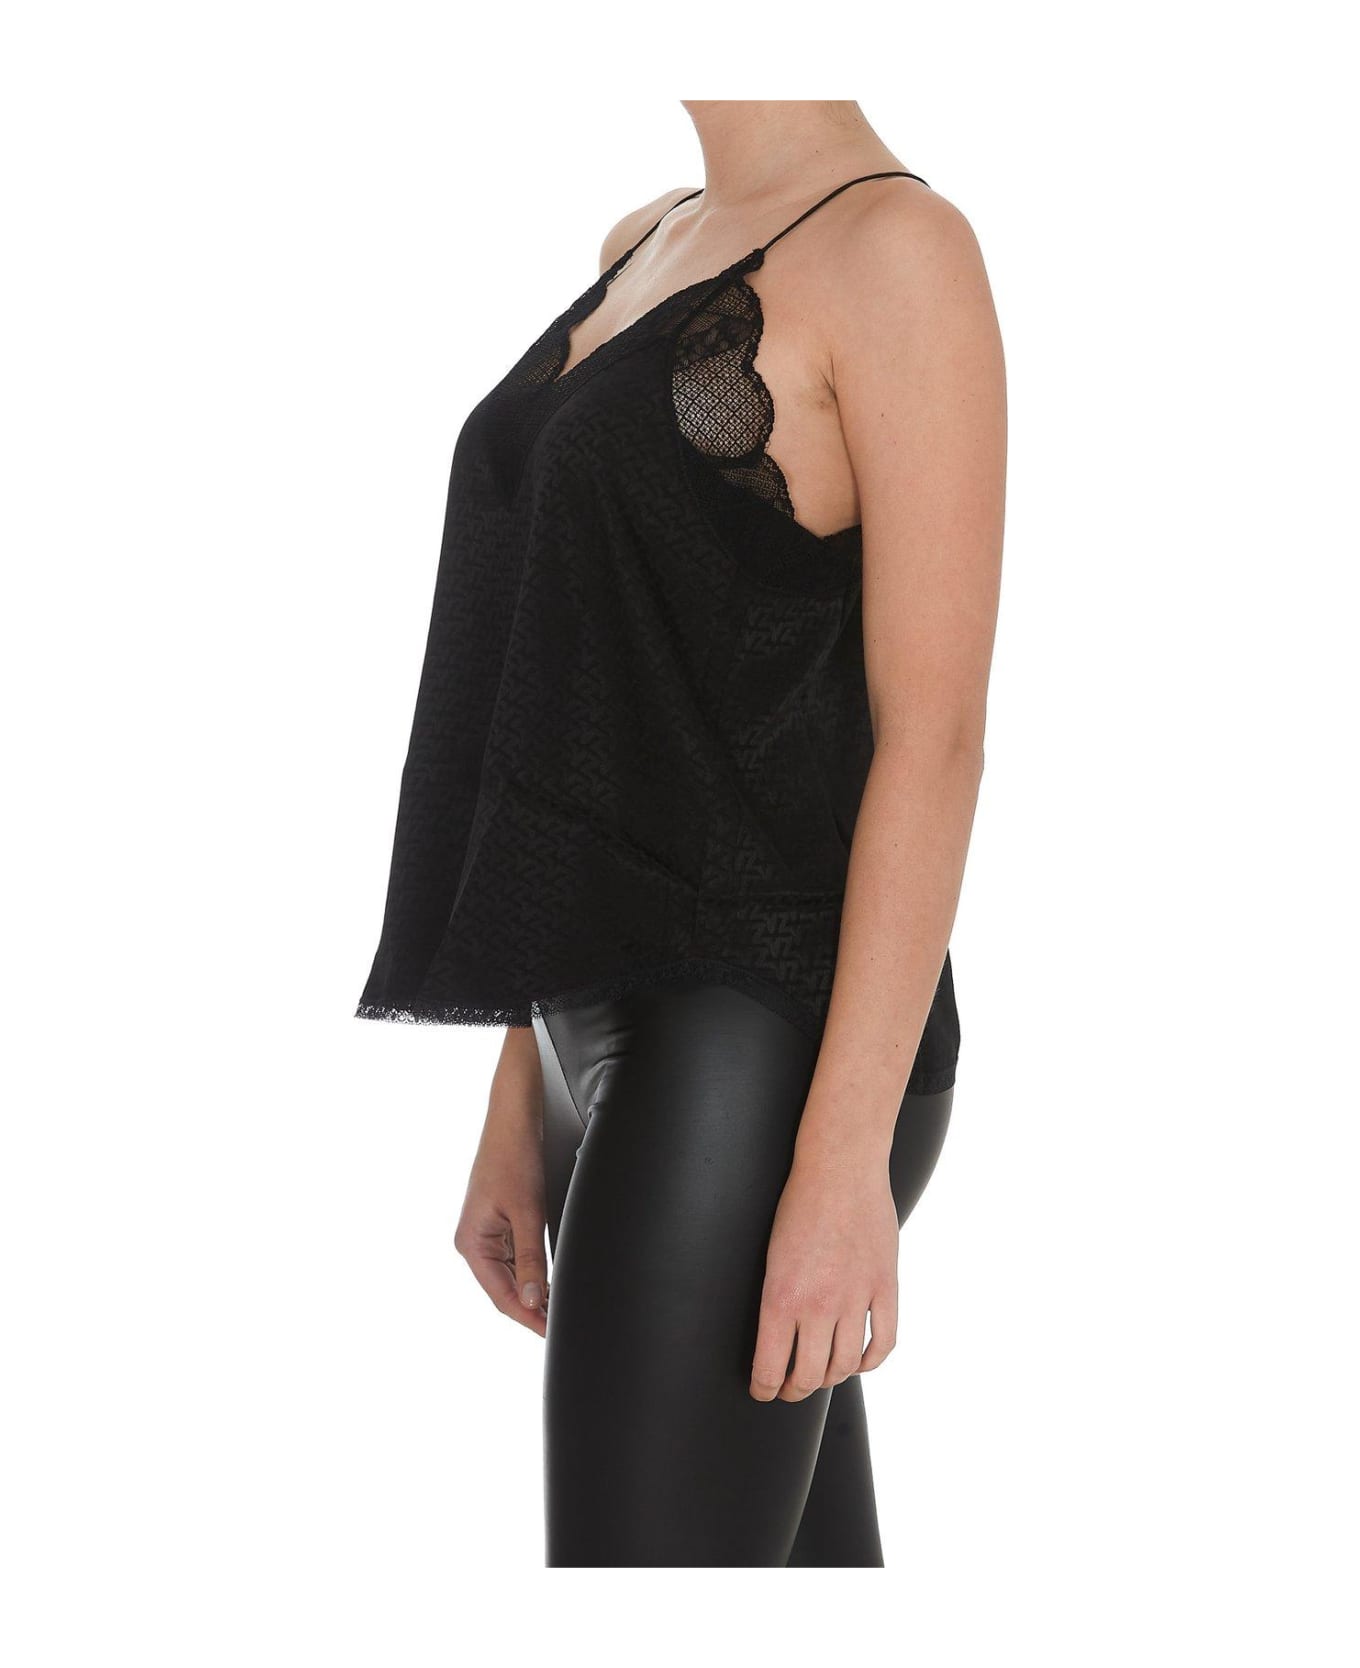 Zadig & Voltaire Christy Jacquard Patterned Camisole - Black